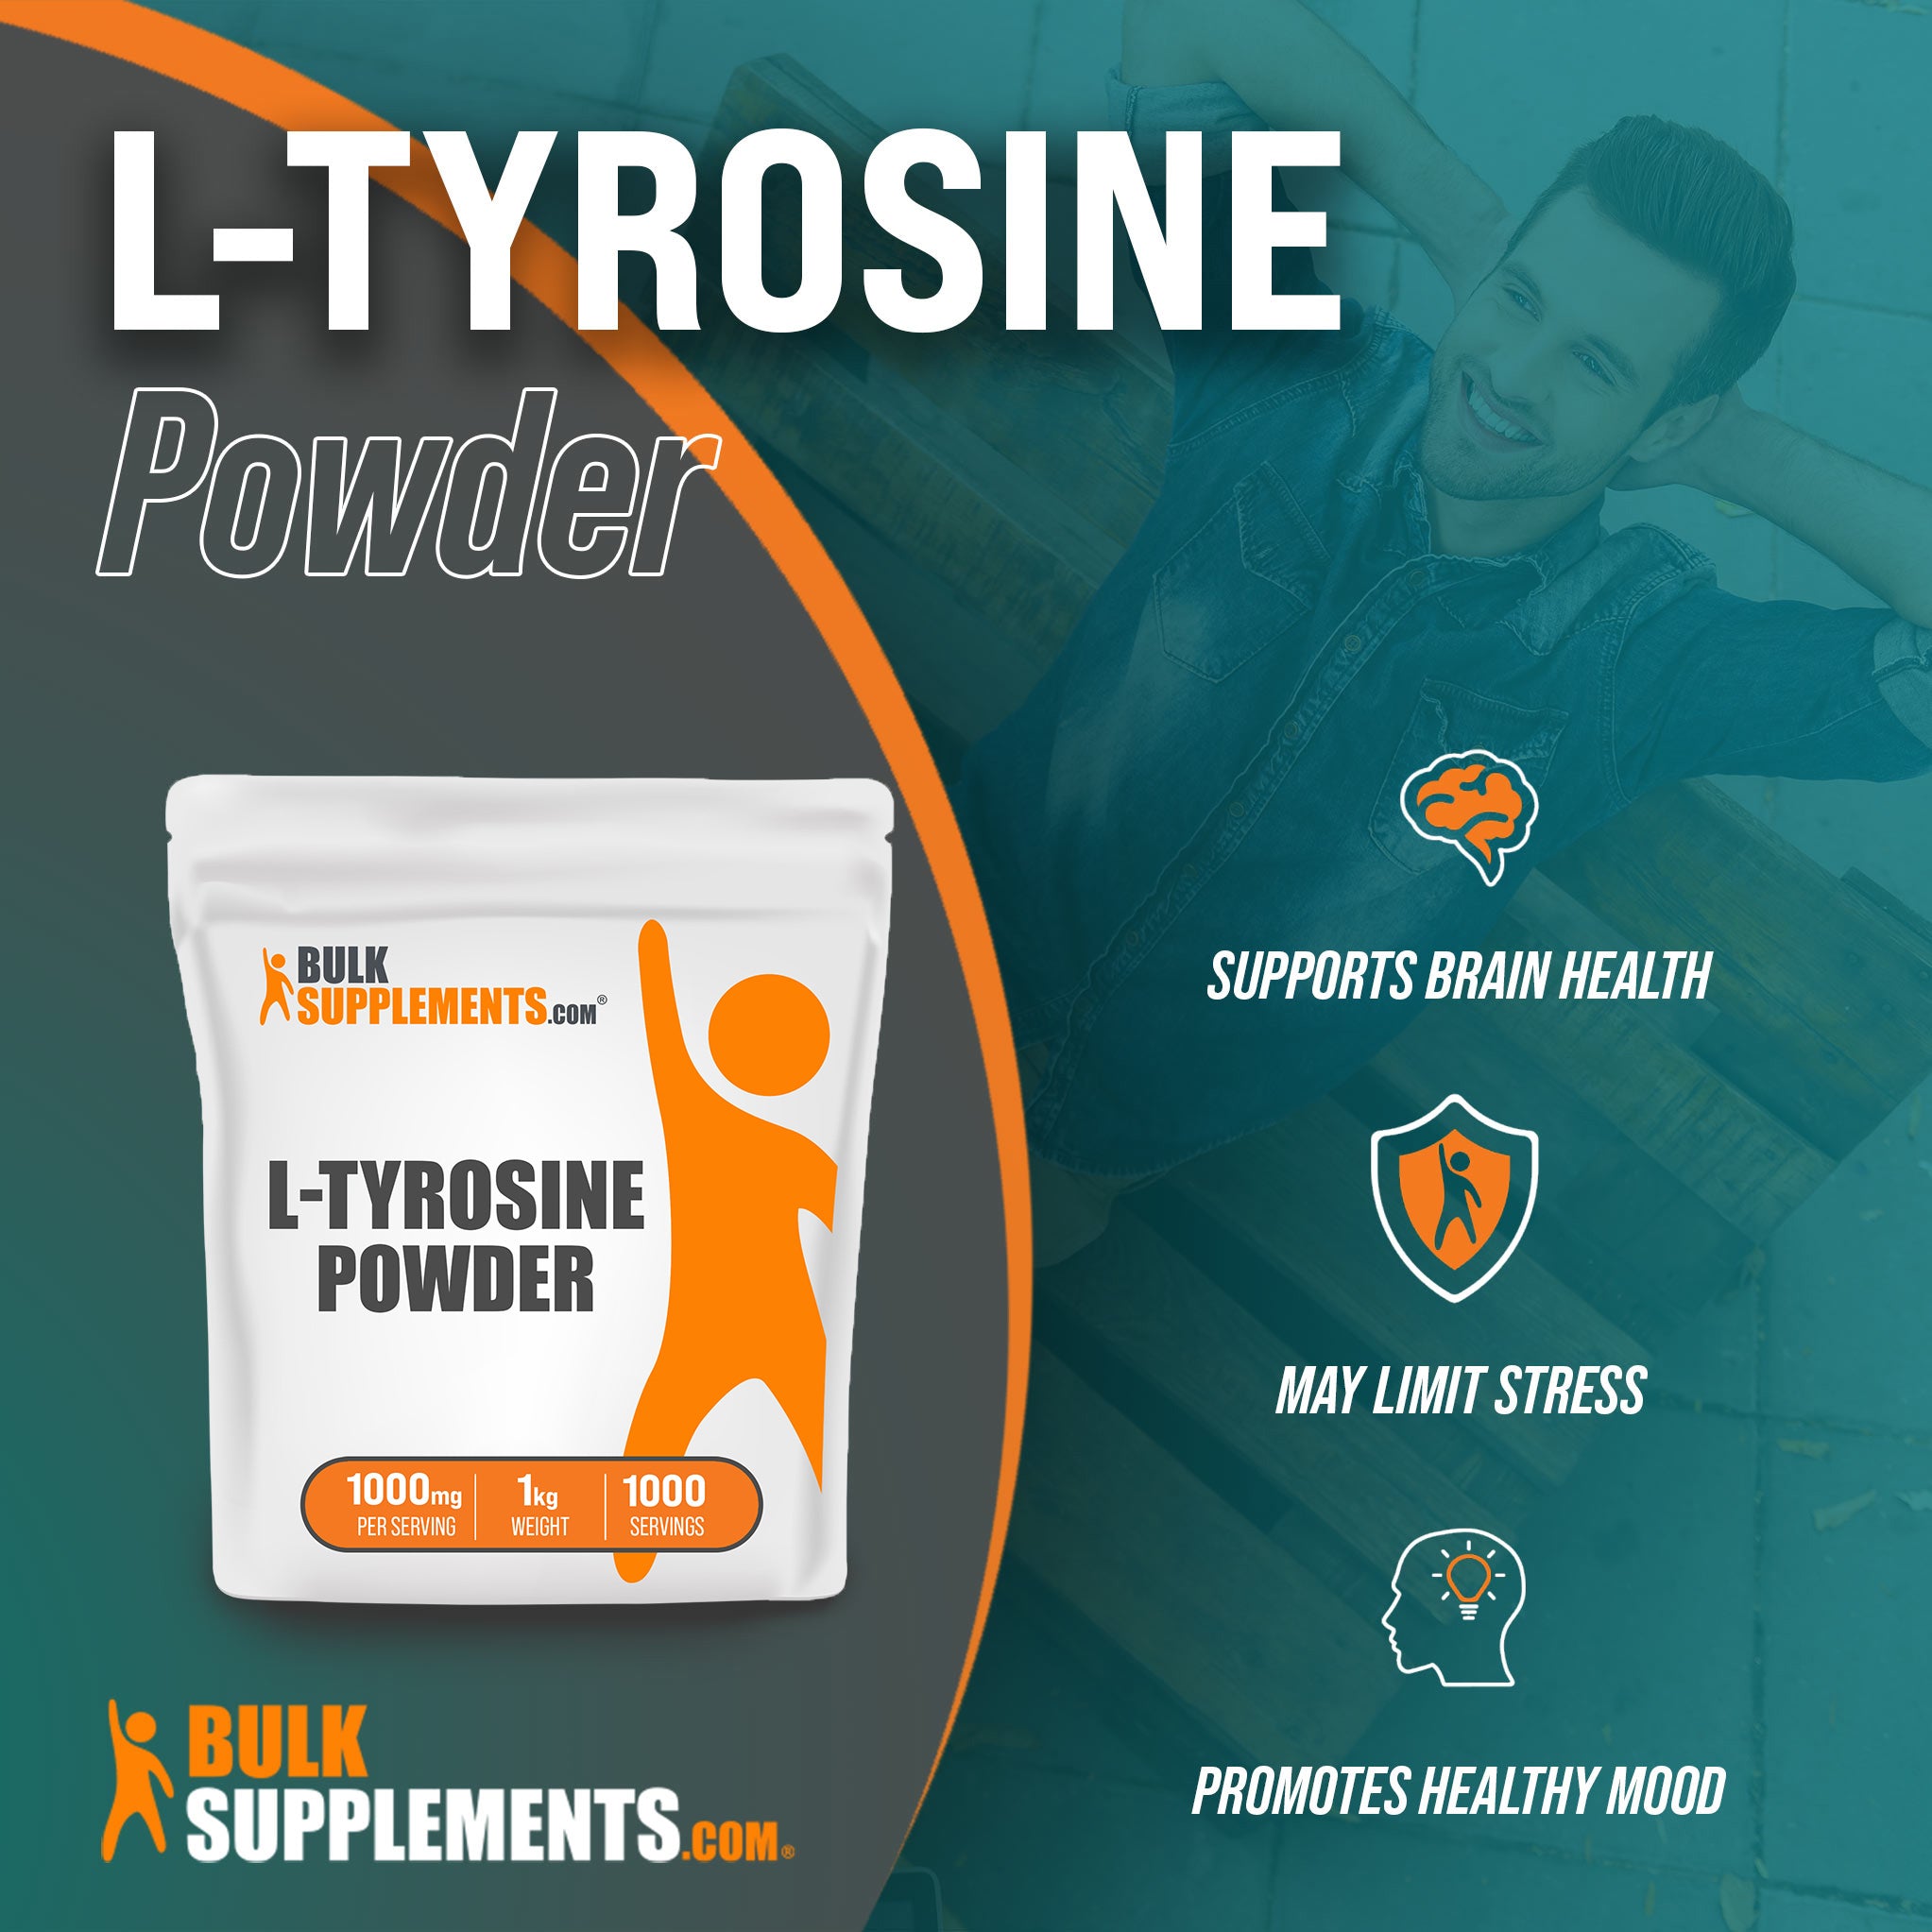 Benefits of L-Tyrosine: supports brain health, may limit stress, promotes healthy mood